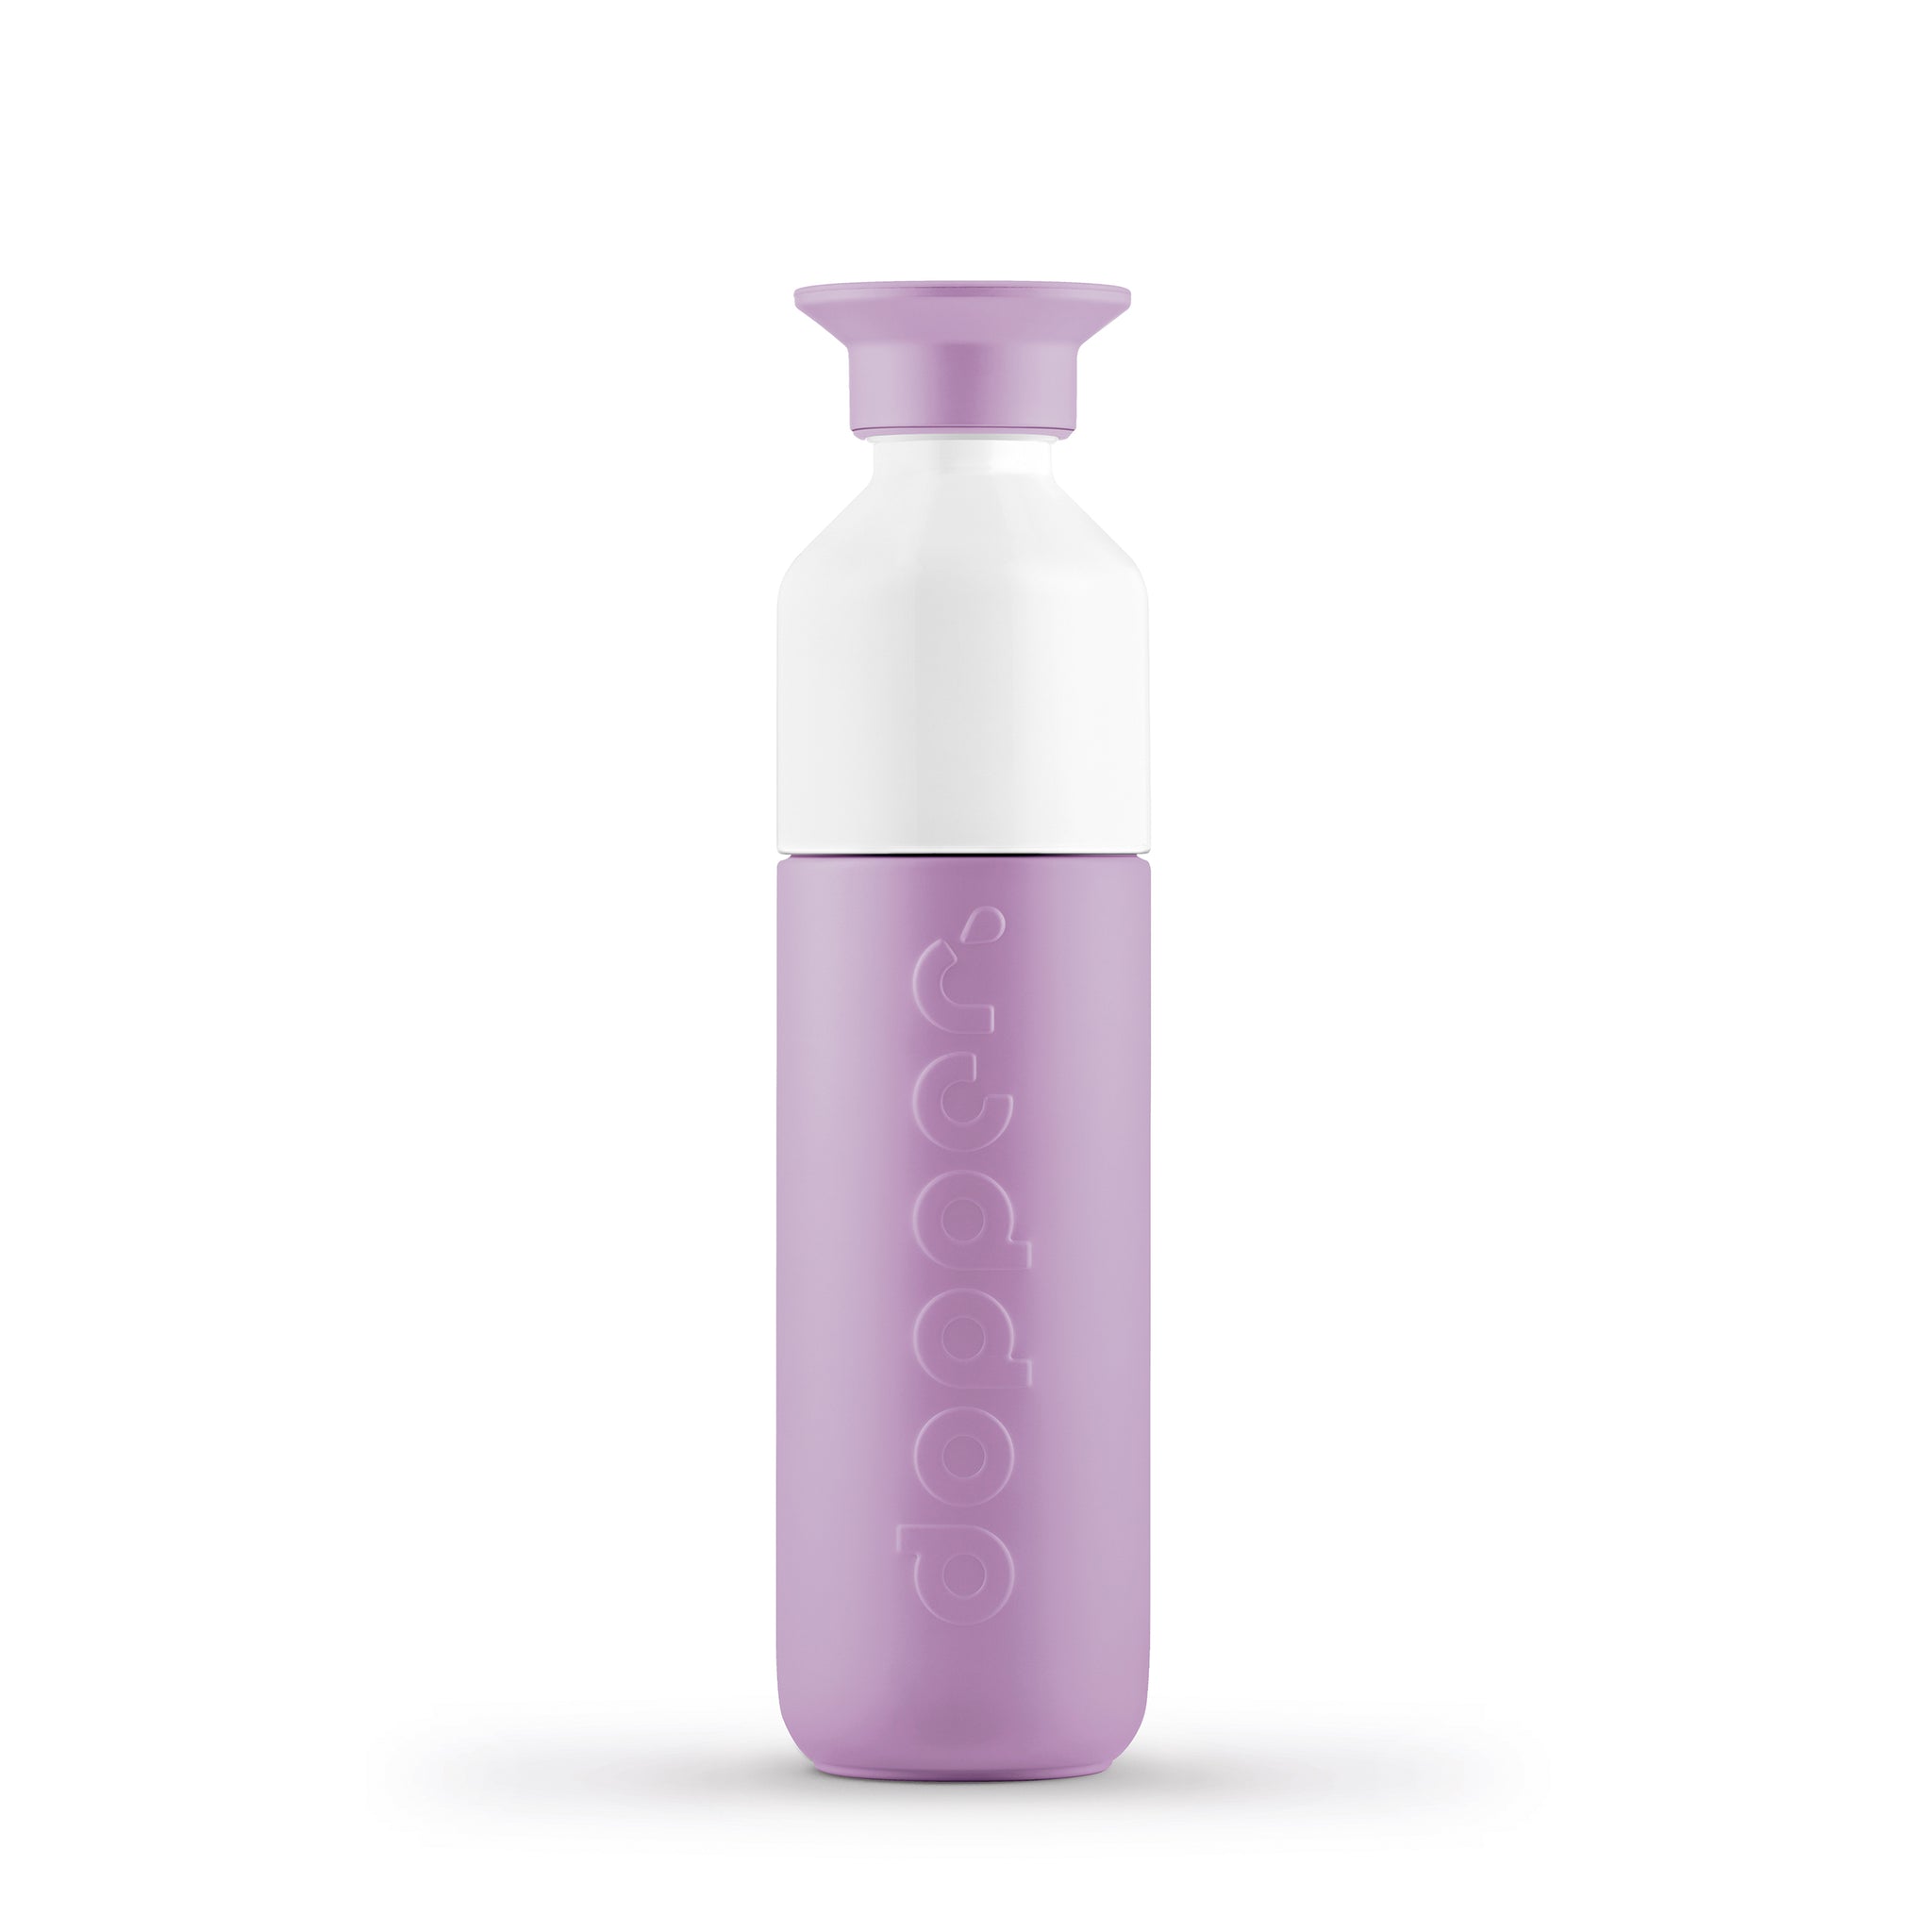 Dopper Insulated Small Throwback Lilac│Thermosfles 350ml paars│art. 4442│voorkant met witte achtergrond